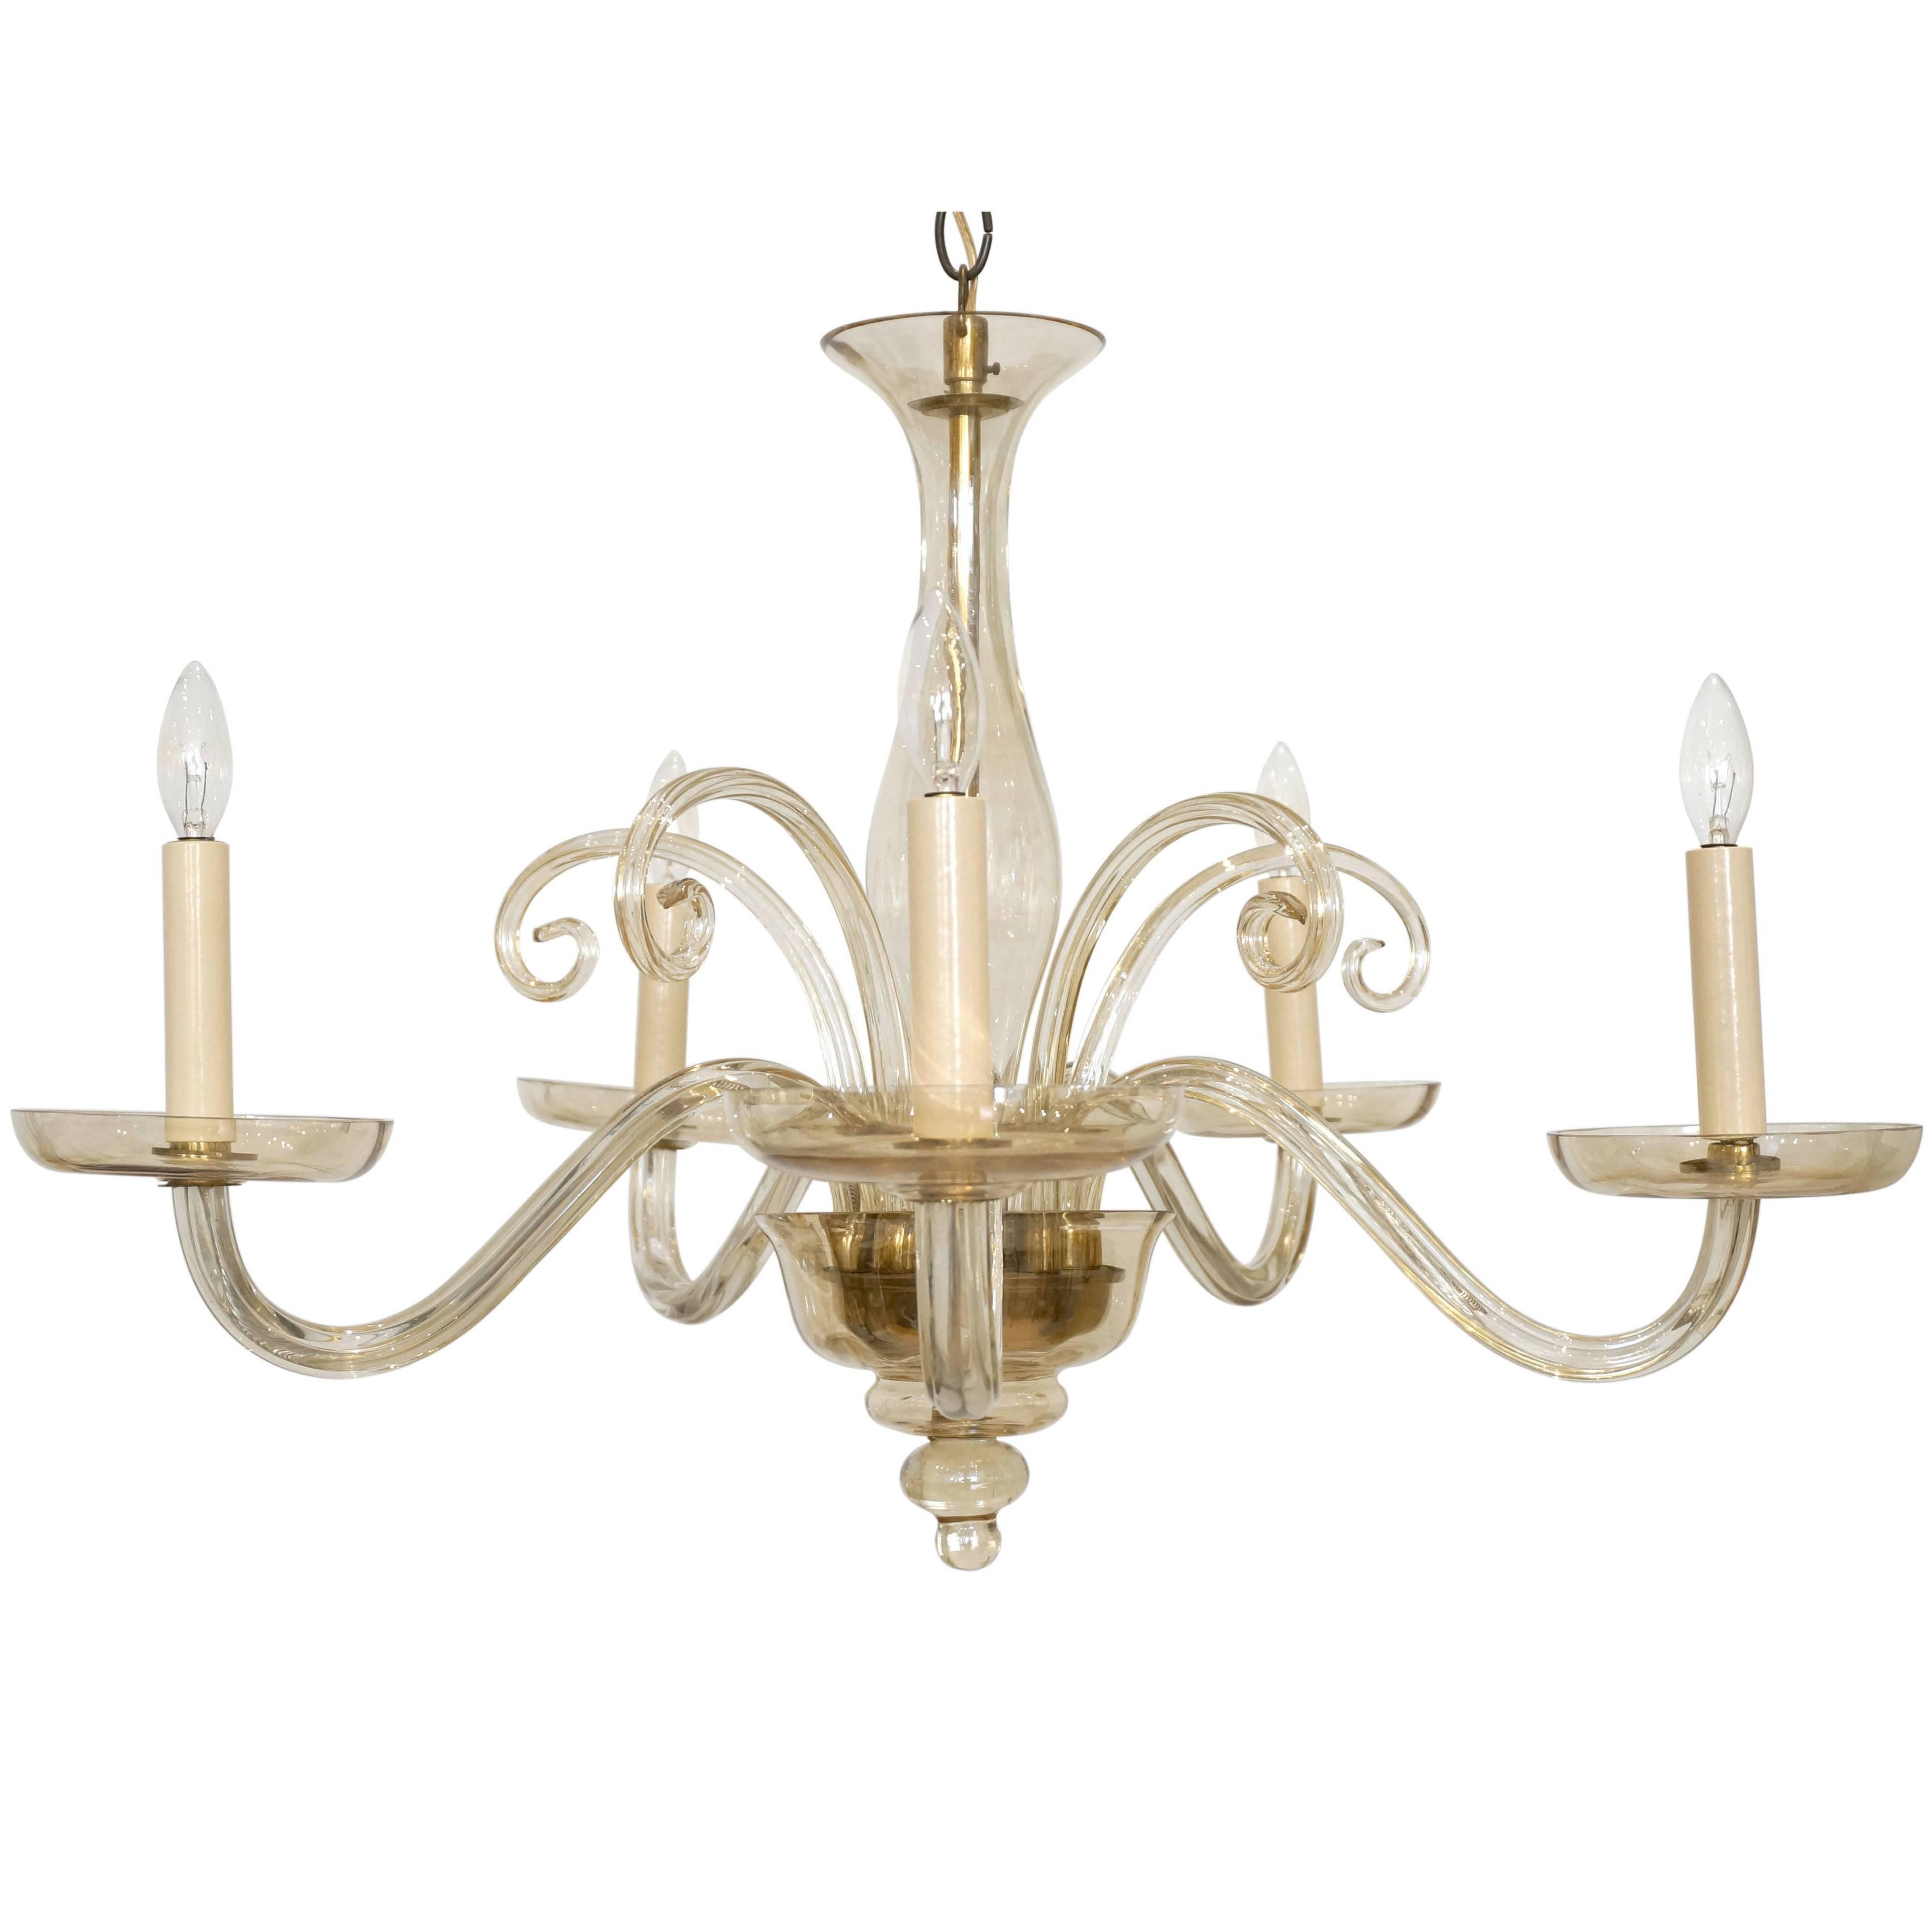 Five-Arm Glass Chandelier with Scroll Form Decoration, France, circa 1970